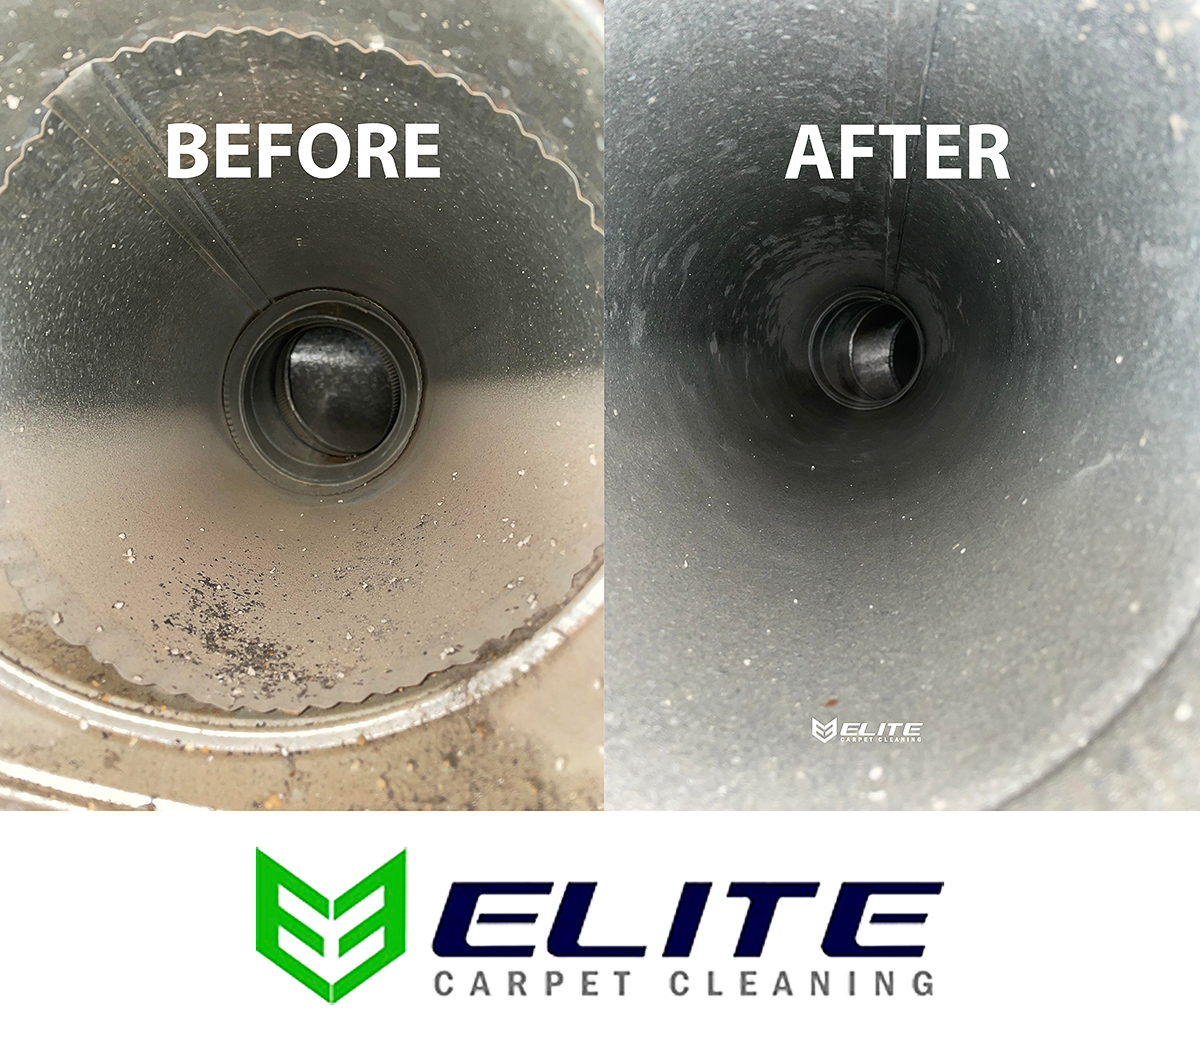 This image shows a metal air duct that has been cleaned by Elite Carpet Cleaning